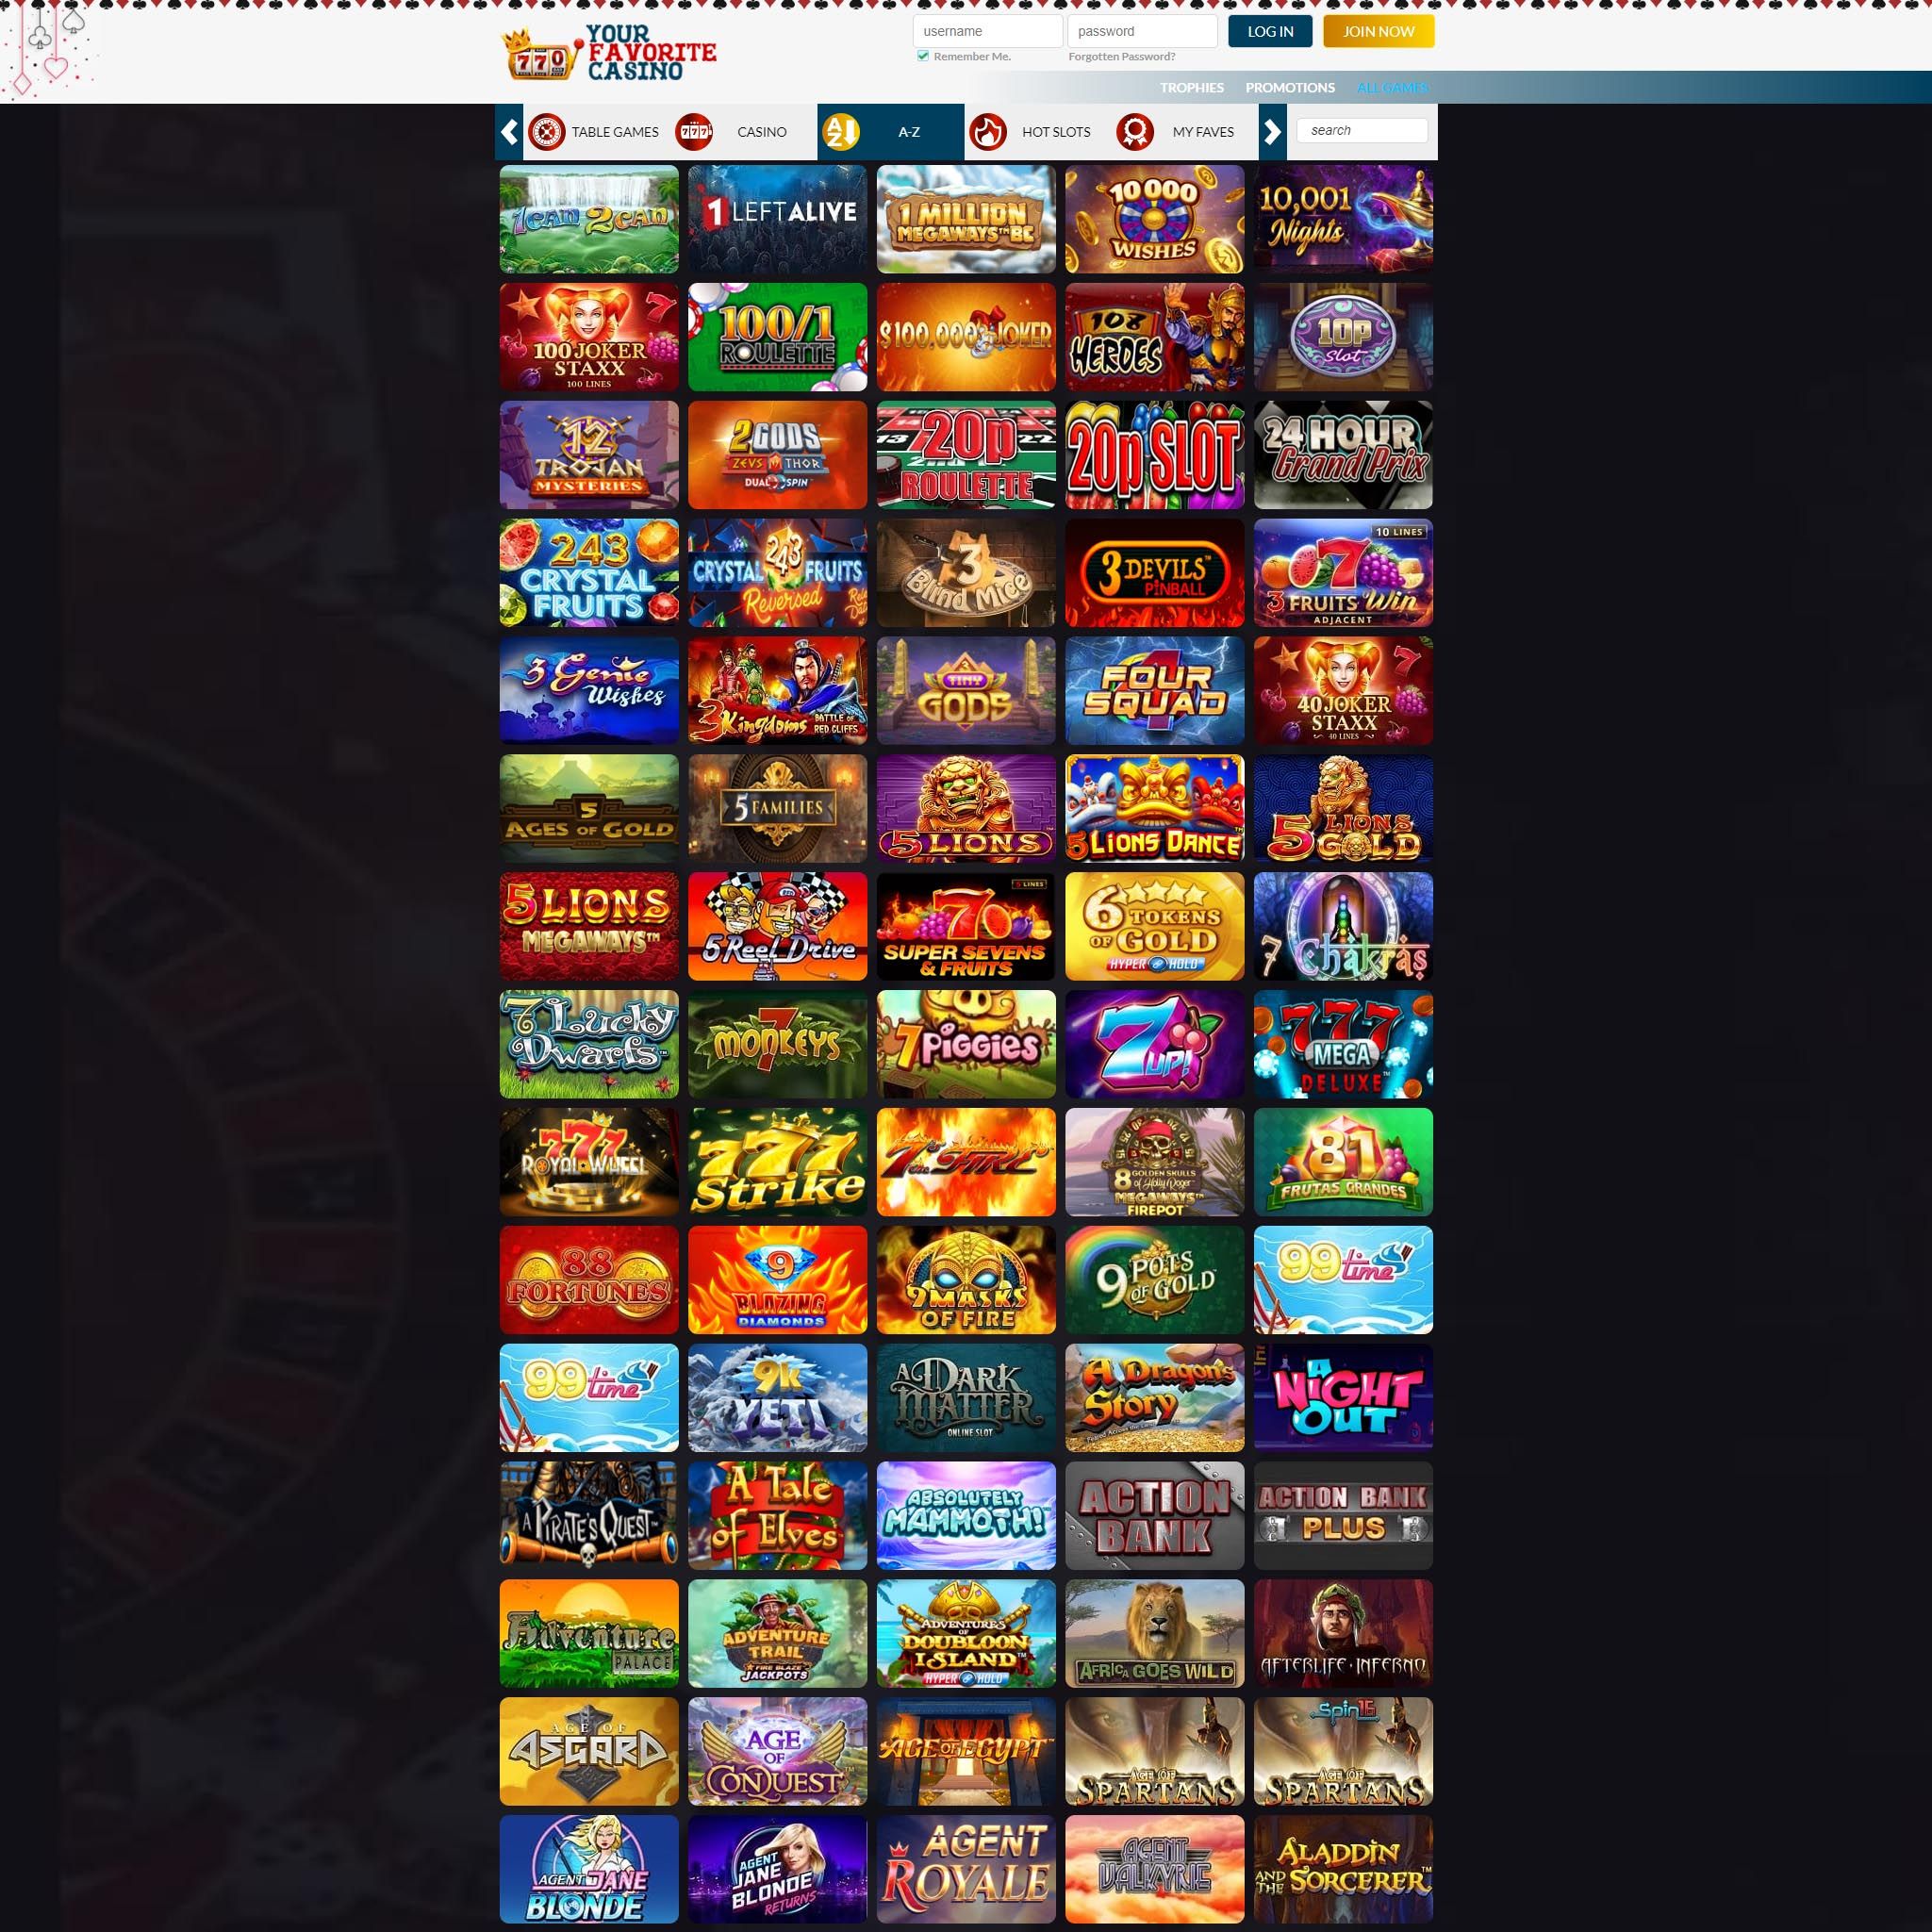 Your Favorite Casino full games catalogue